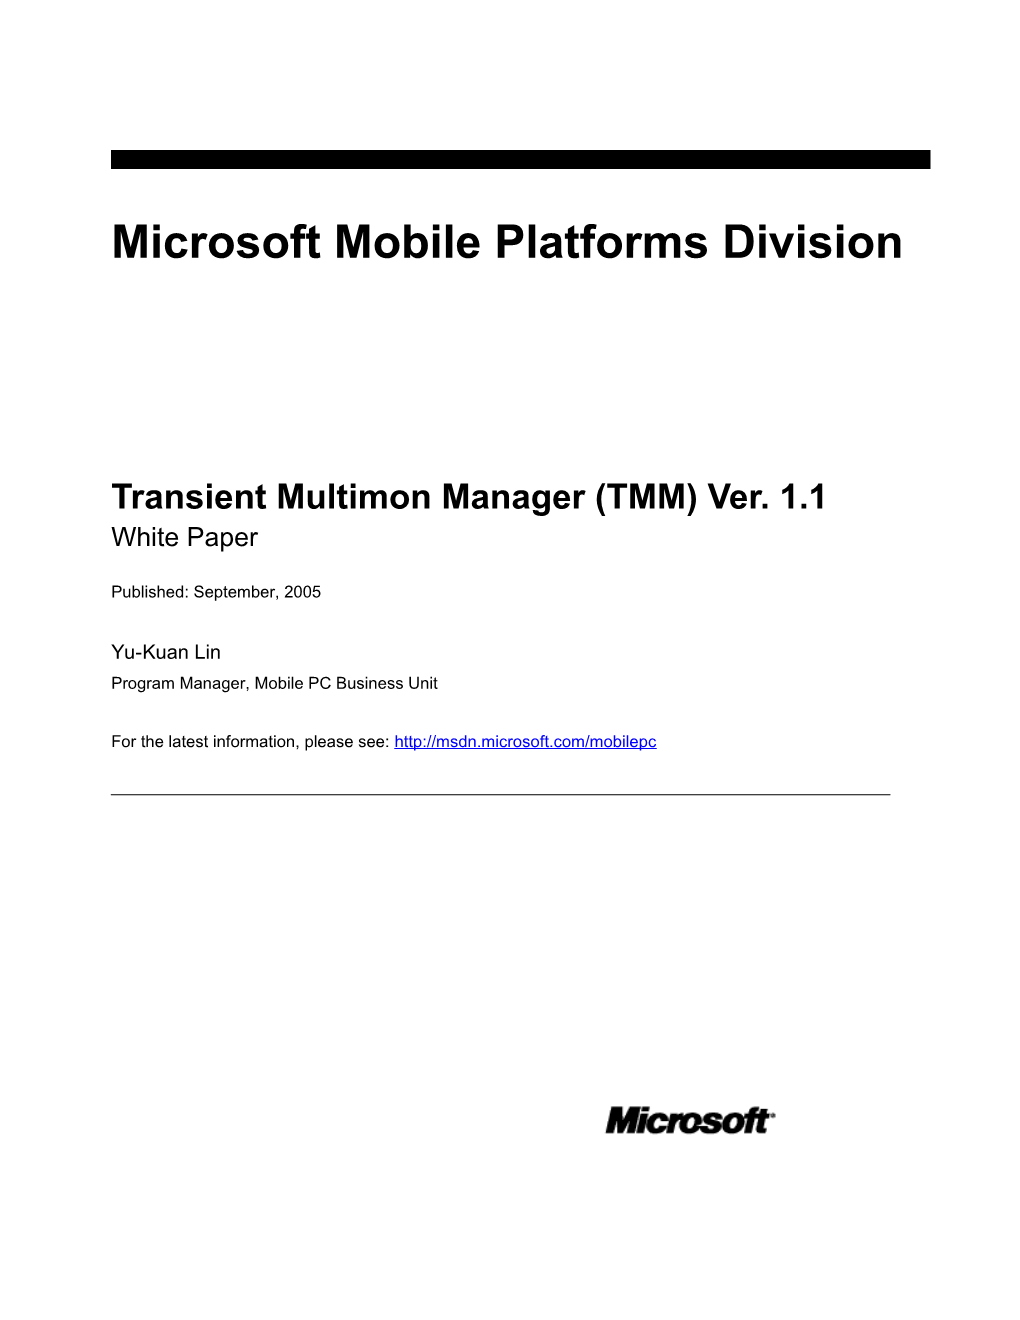 Transient Multimon Manager (TMM) Ver. 1.1